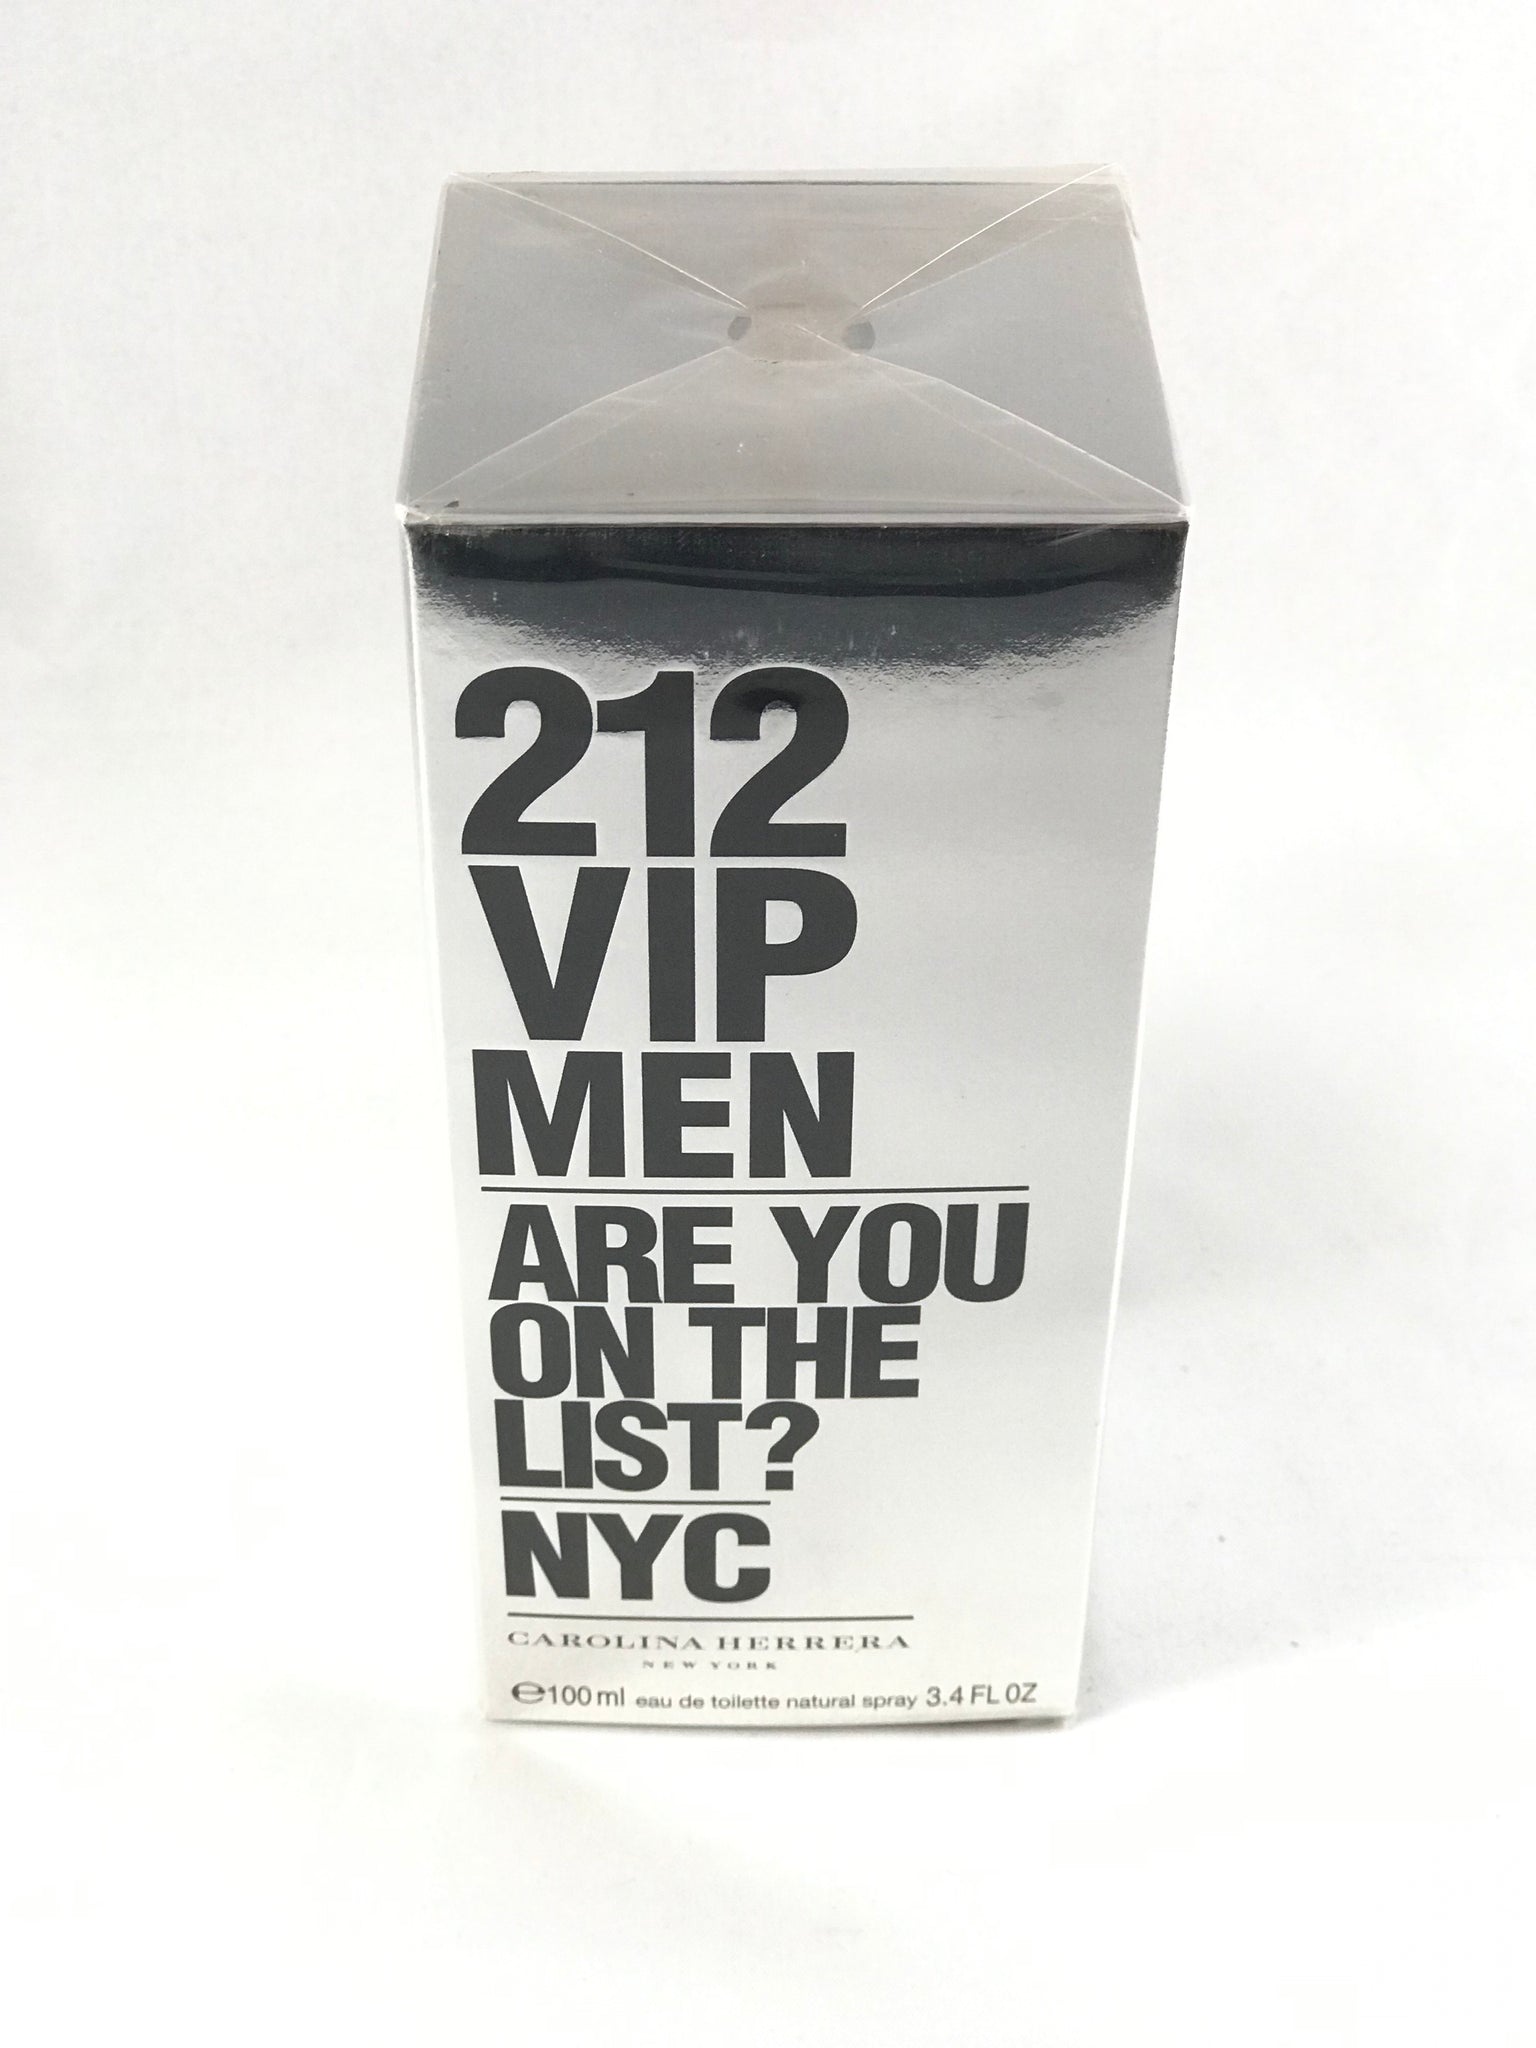 212 vip gifts list – & special always on the men perfumes EDT Herrera Carolina nyc ? are 3.4oz you